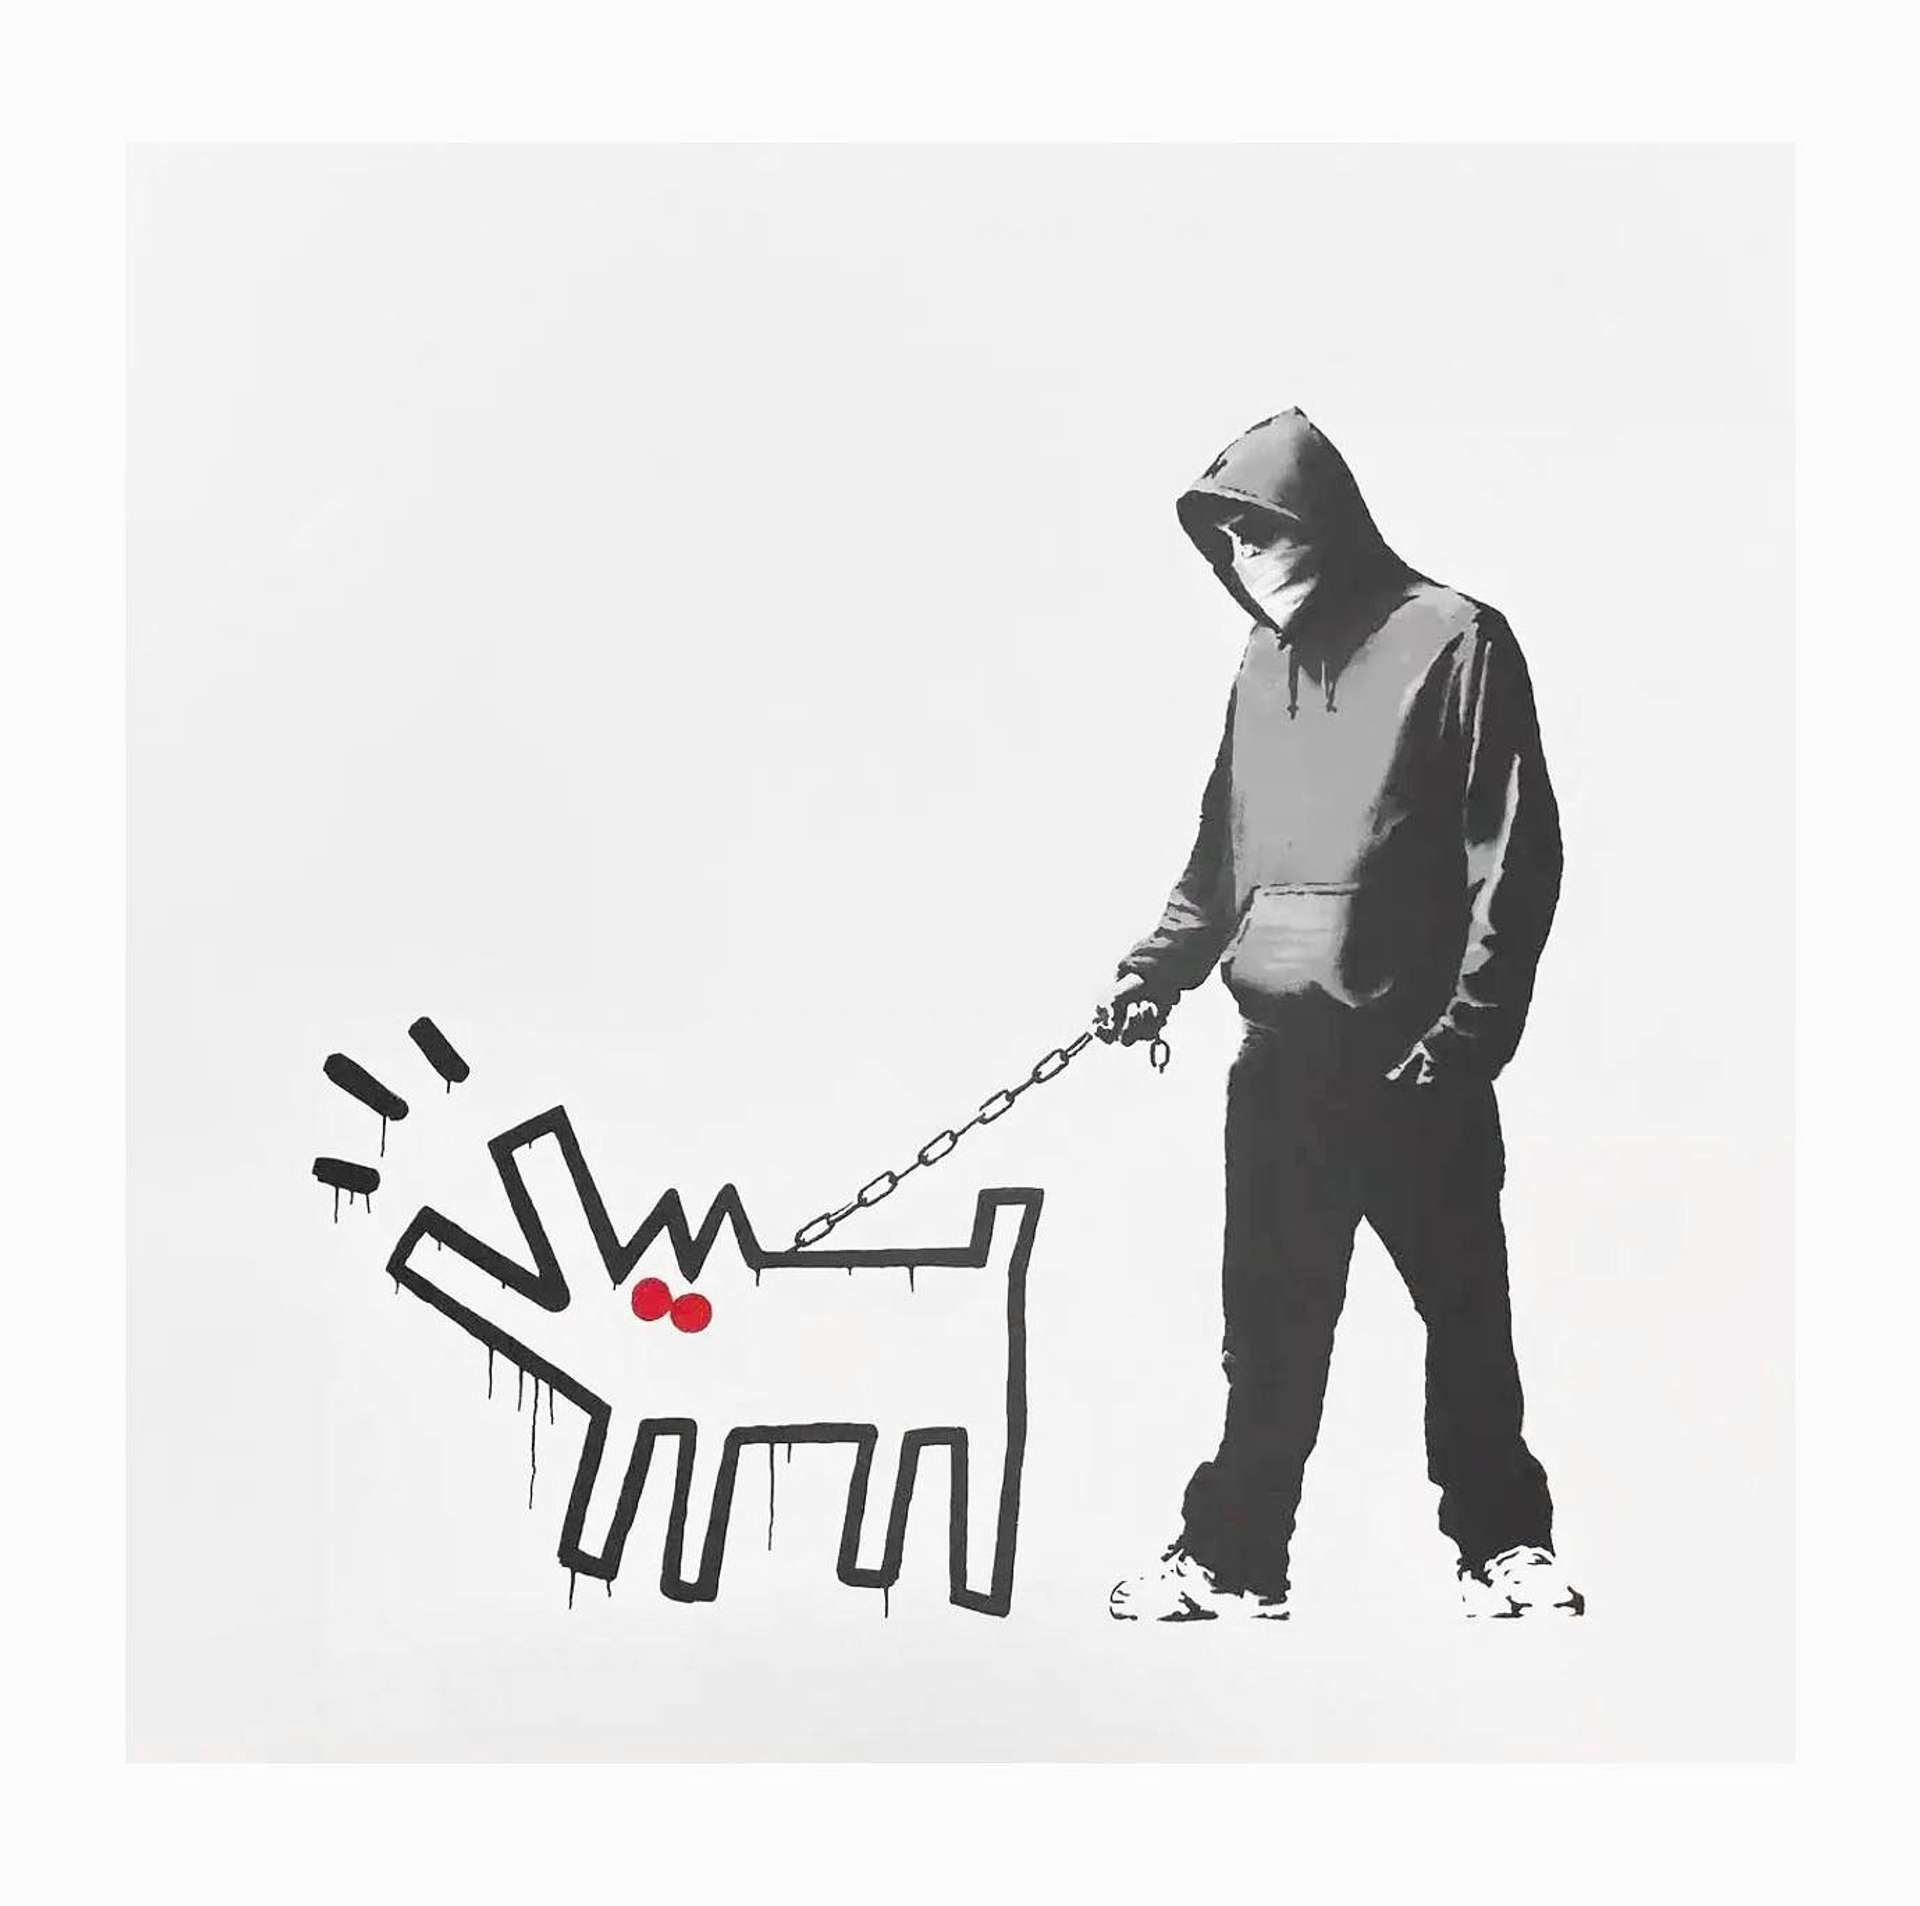 A black and white signed, hand finished screen print by Banksy depicting a hooded man holding a dog which resembles Keith Haring's Barking Dog with red eyes.